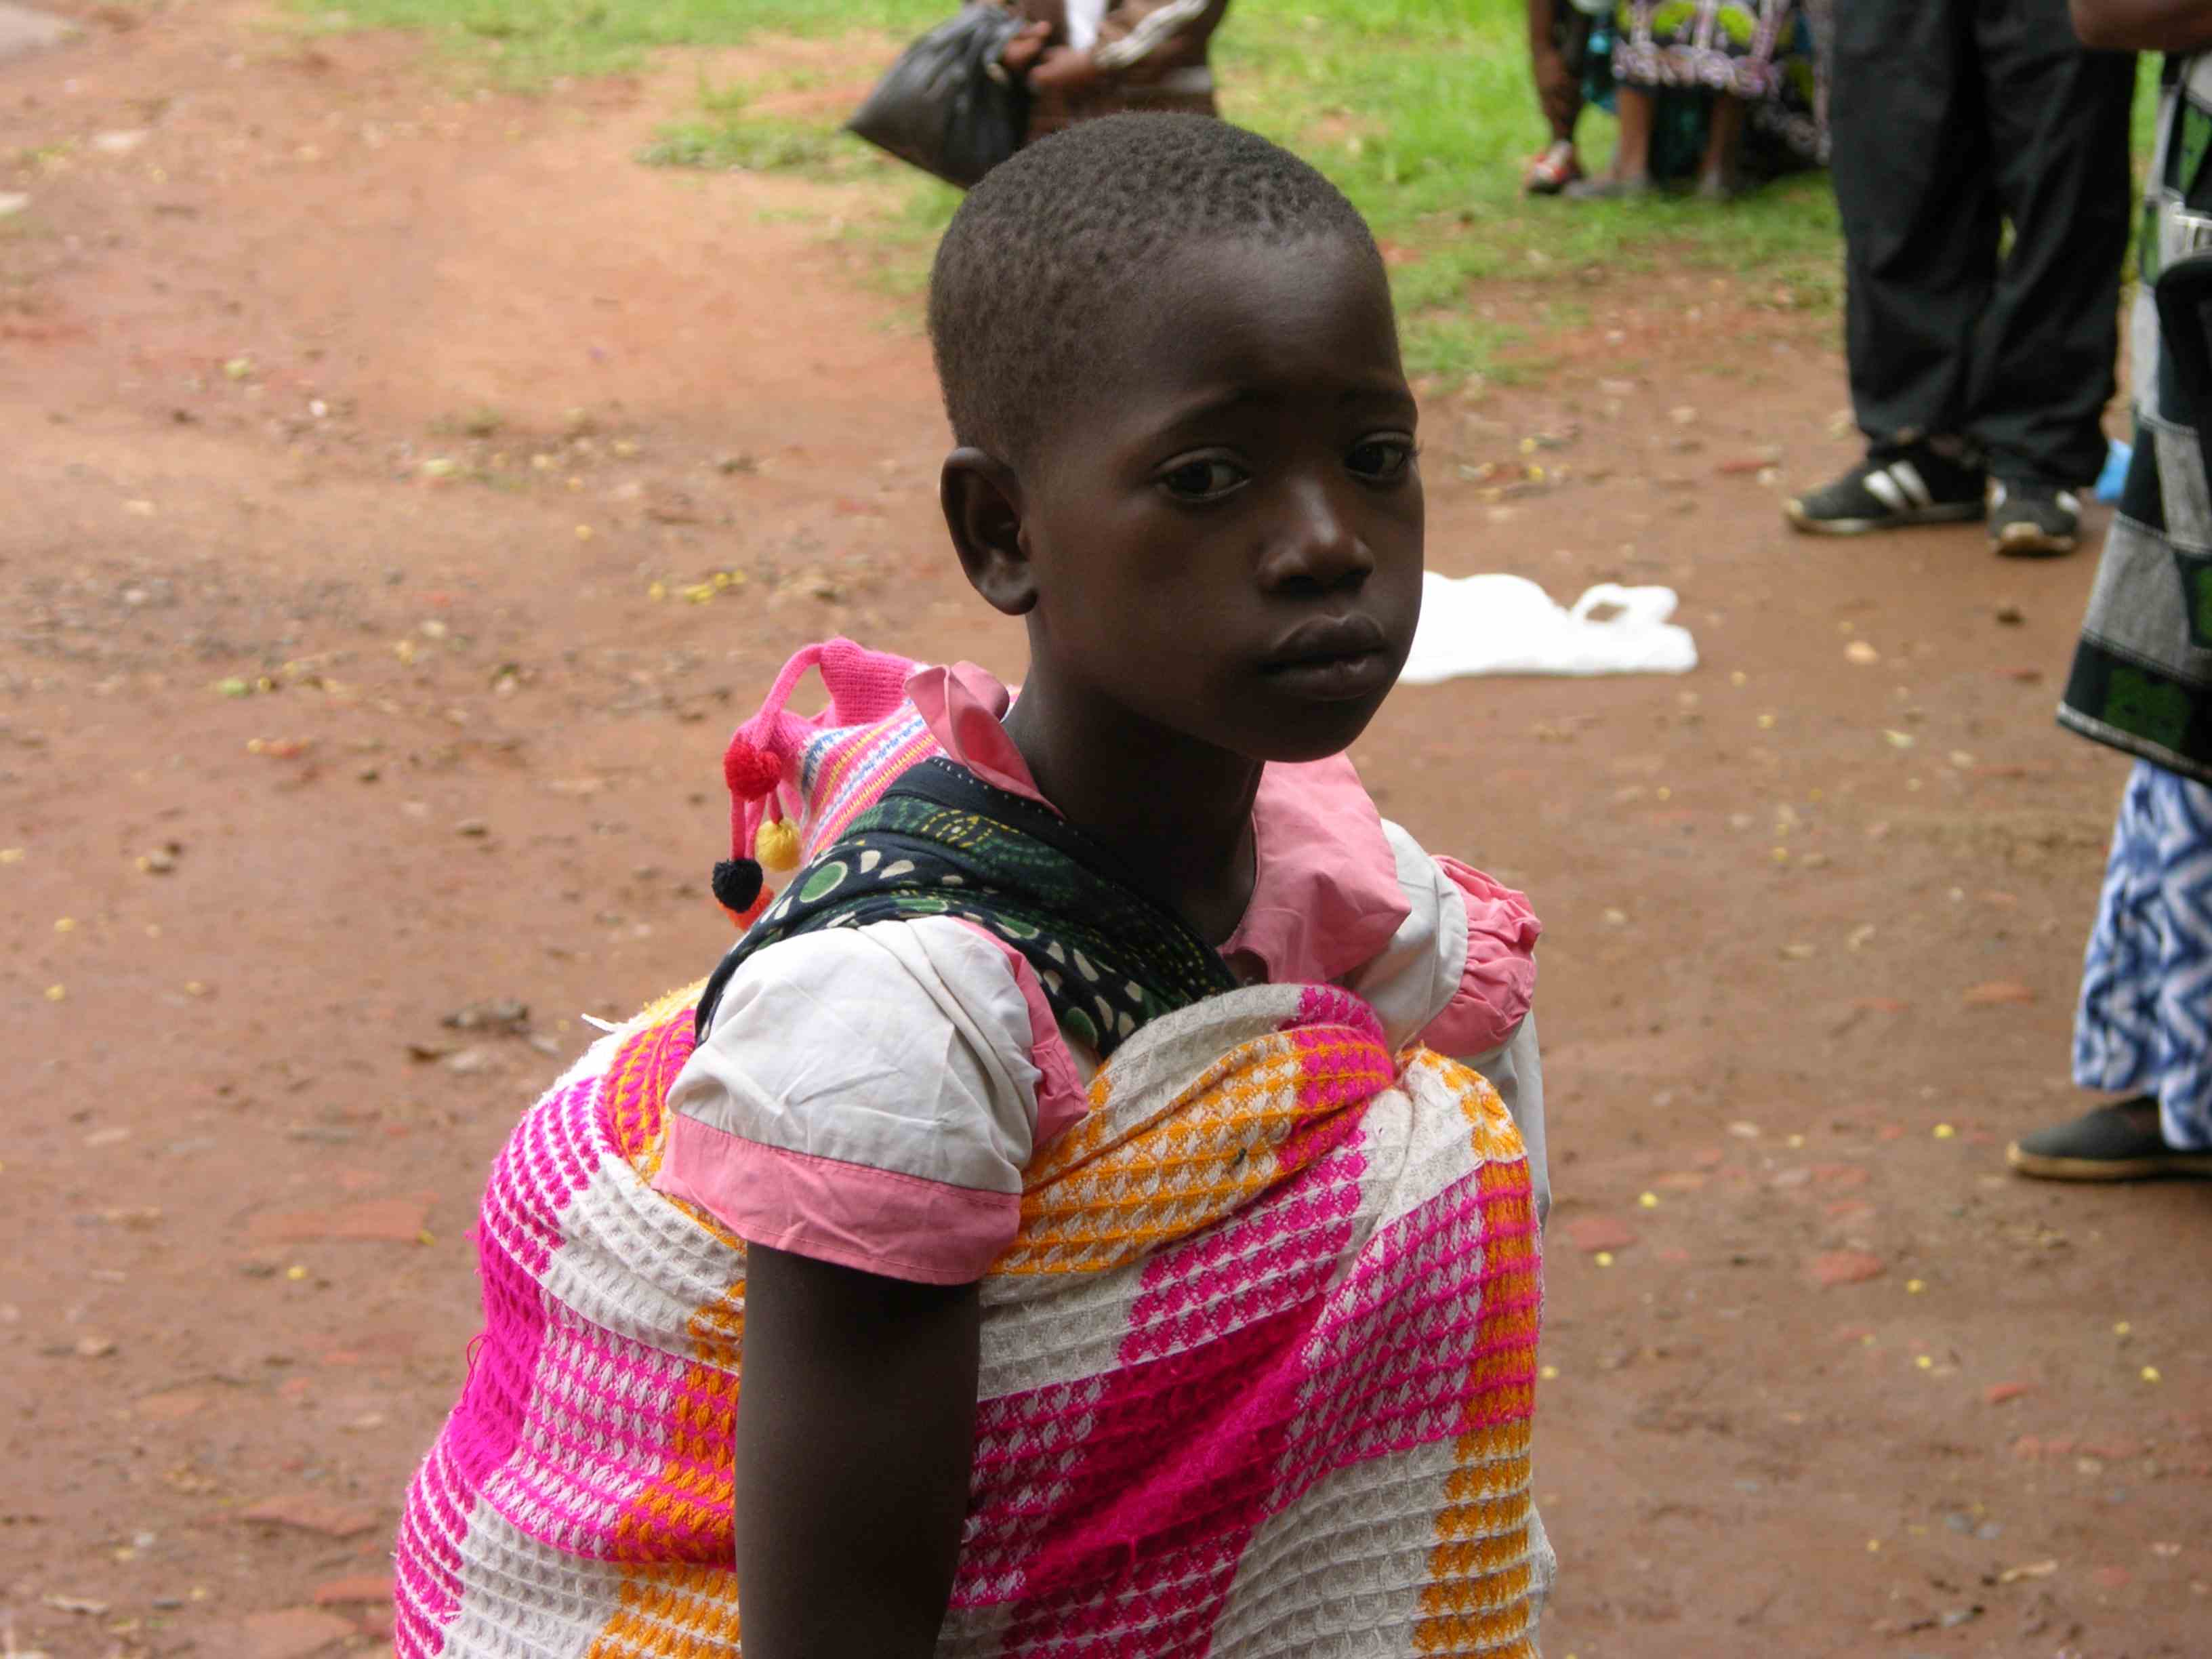 Girl at Kamuzu Central Hospital with a baby on her back (Photo by: Anna Sparks)